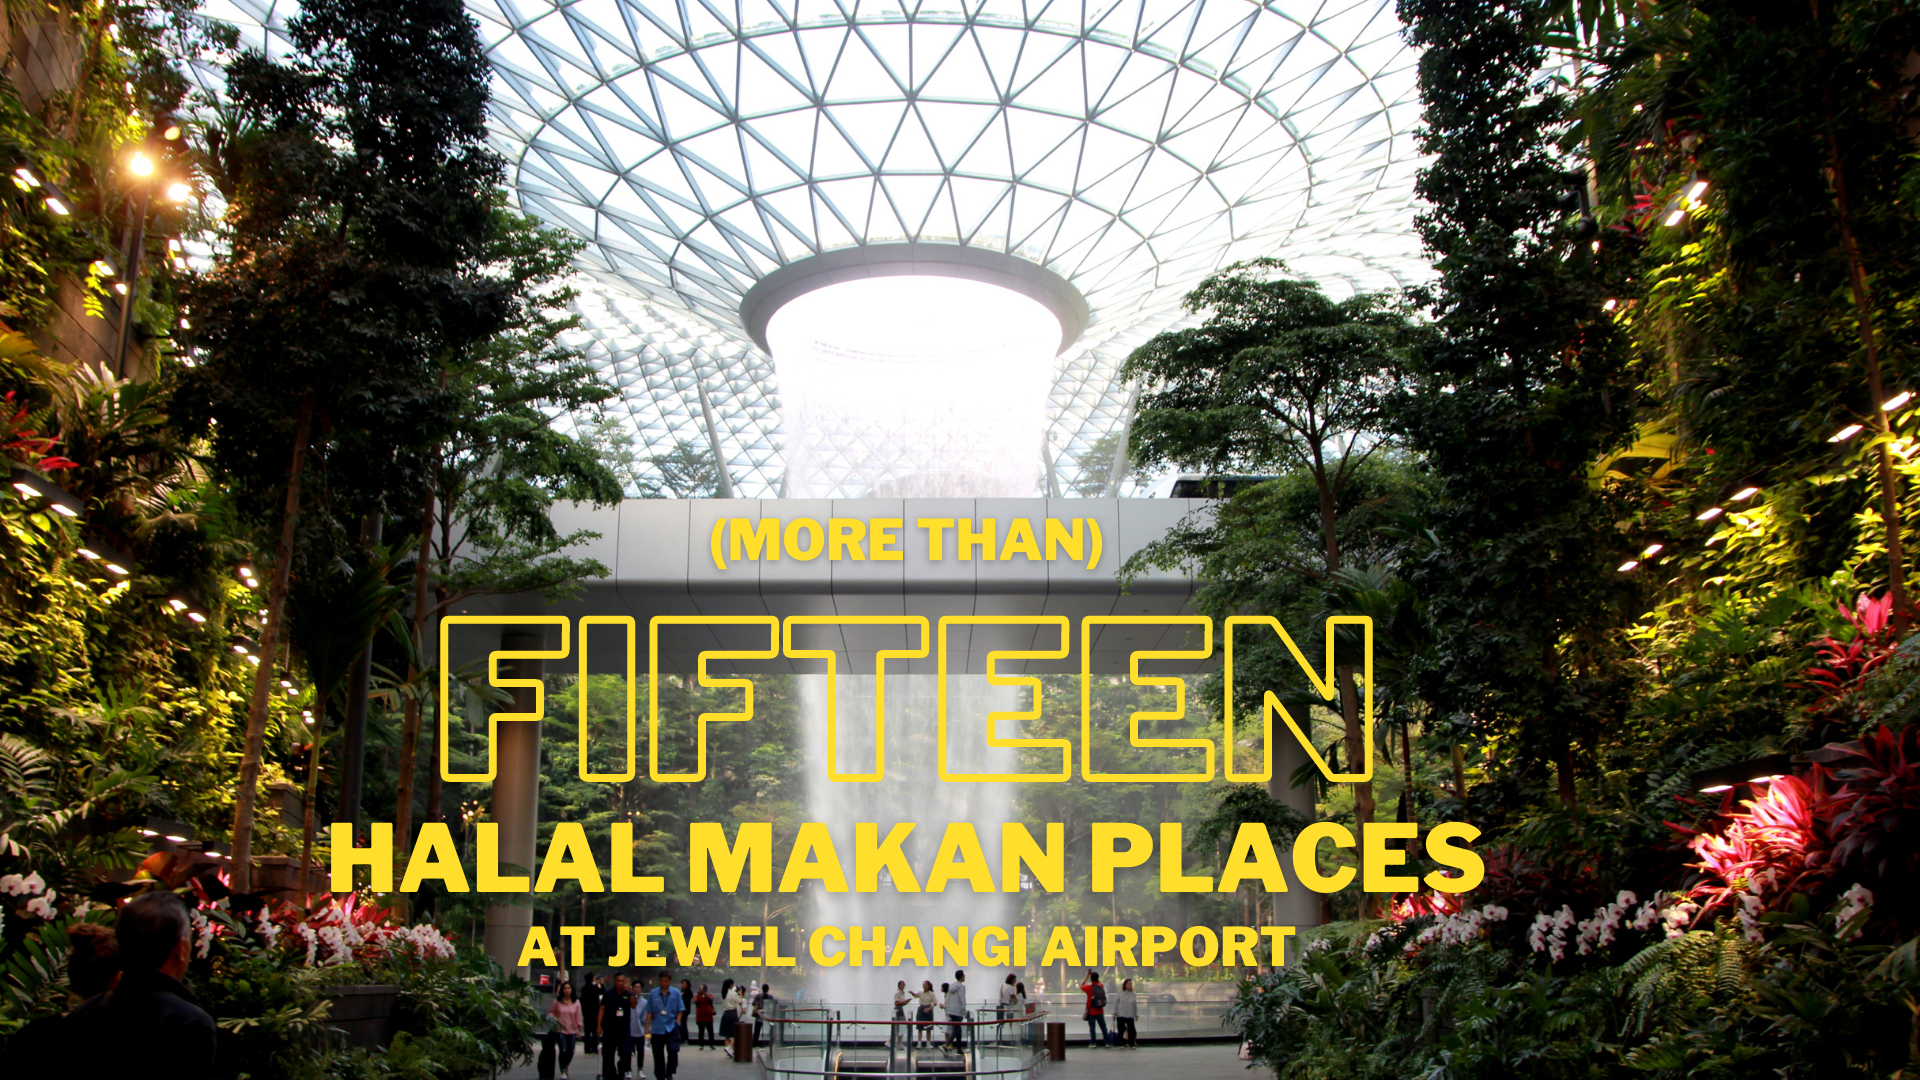 (More Than) 20 Halal Makan Places at Jewel featured image